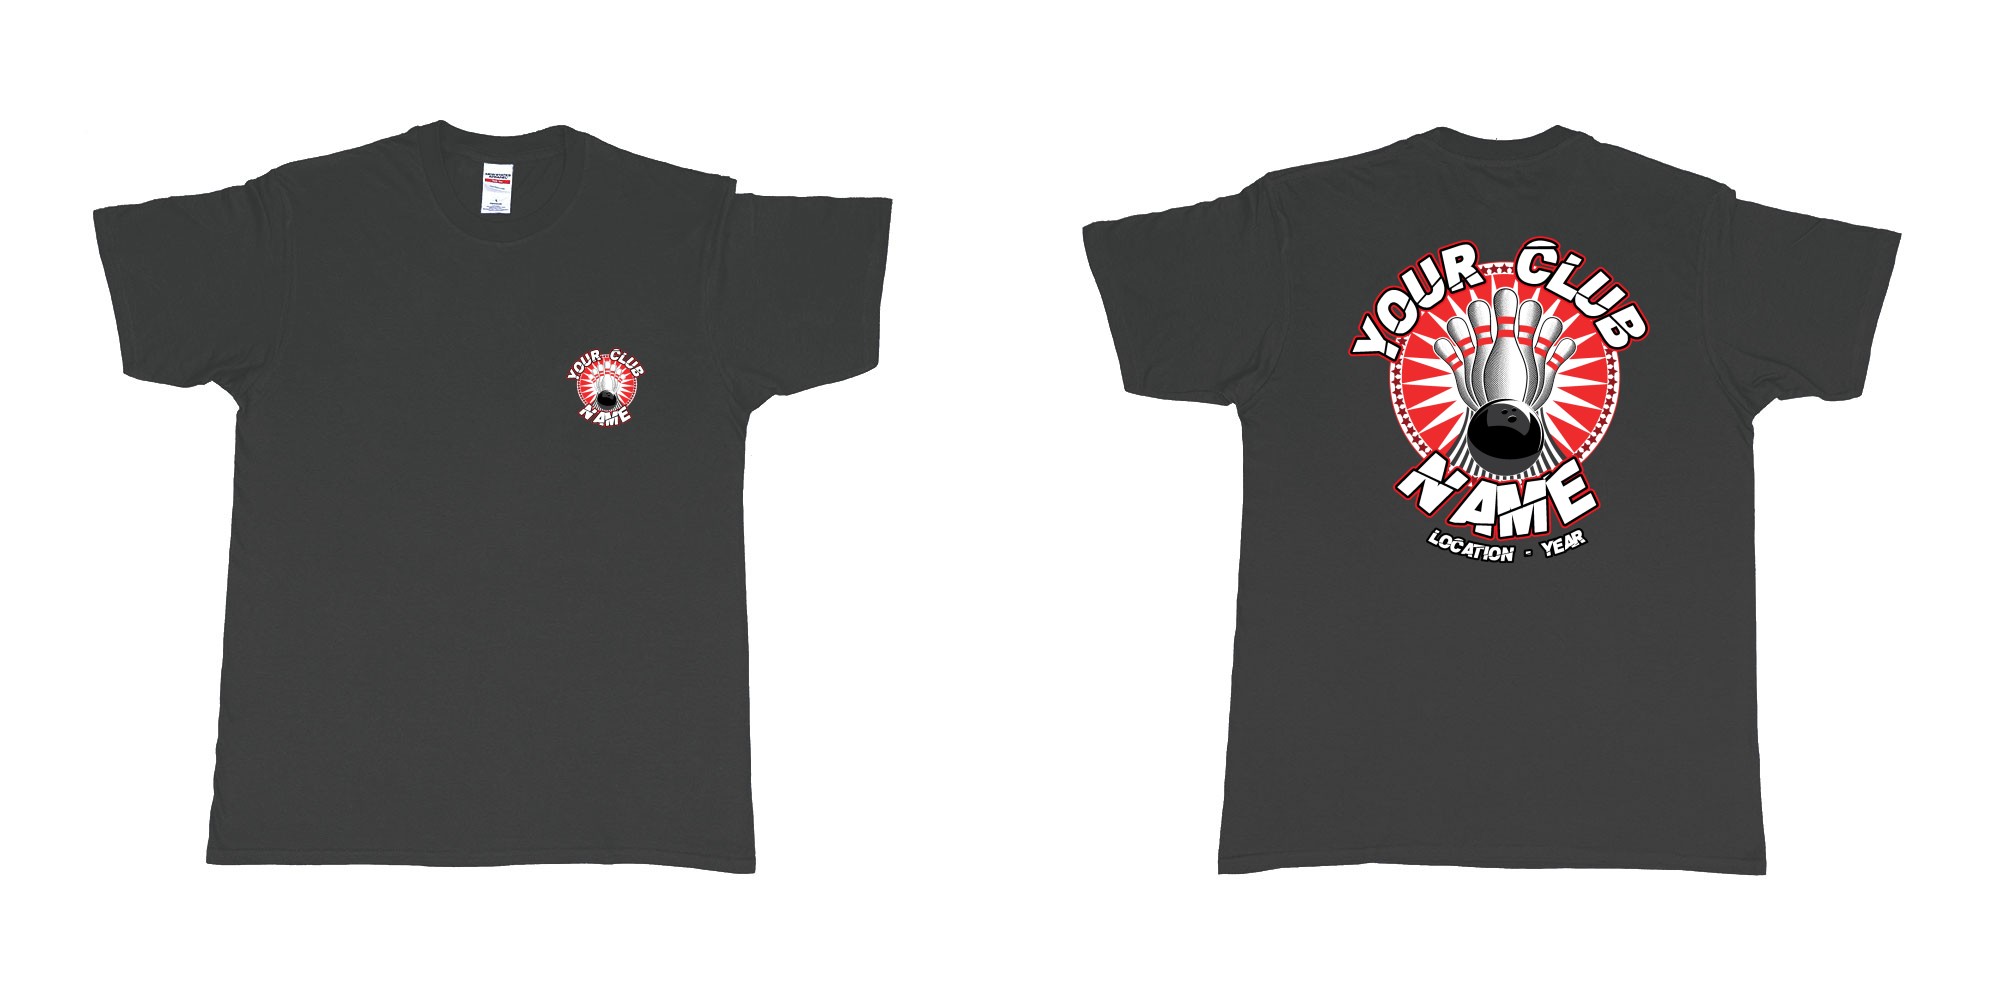 Custom tshirt design TPW strike bowling in fabric color black choice your own text made in Bali by The Pirate Way